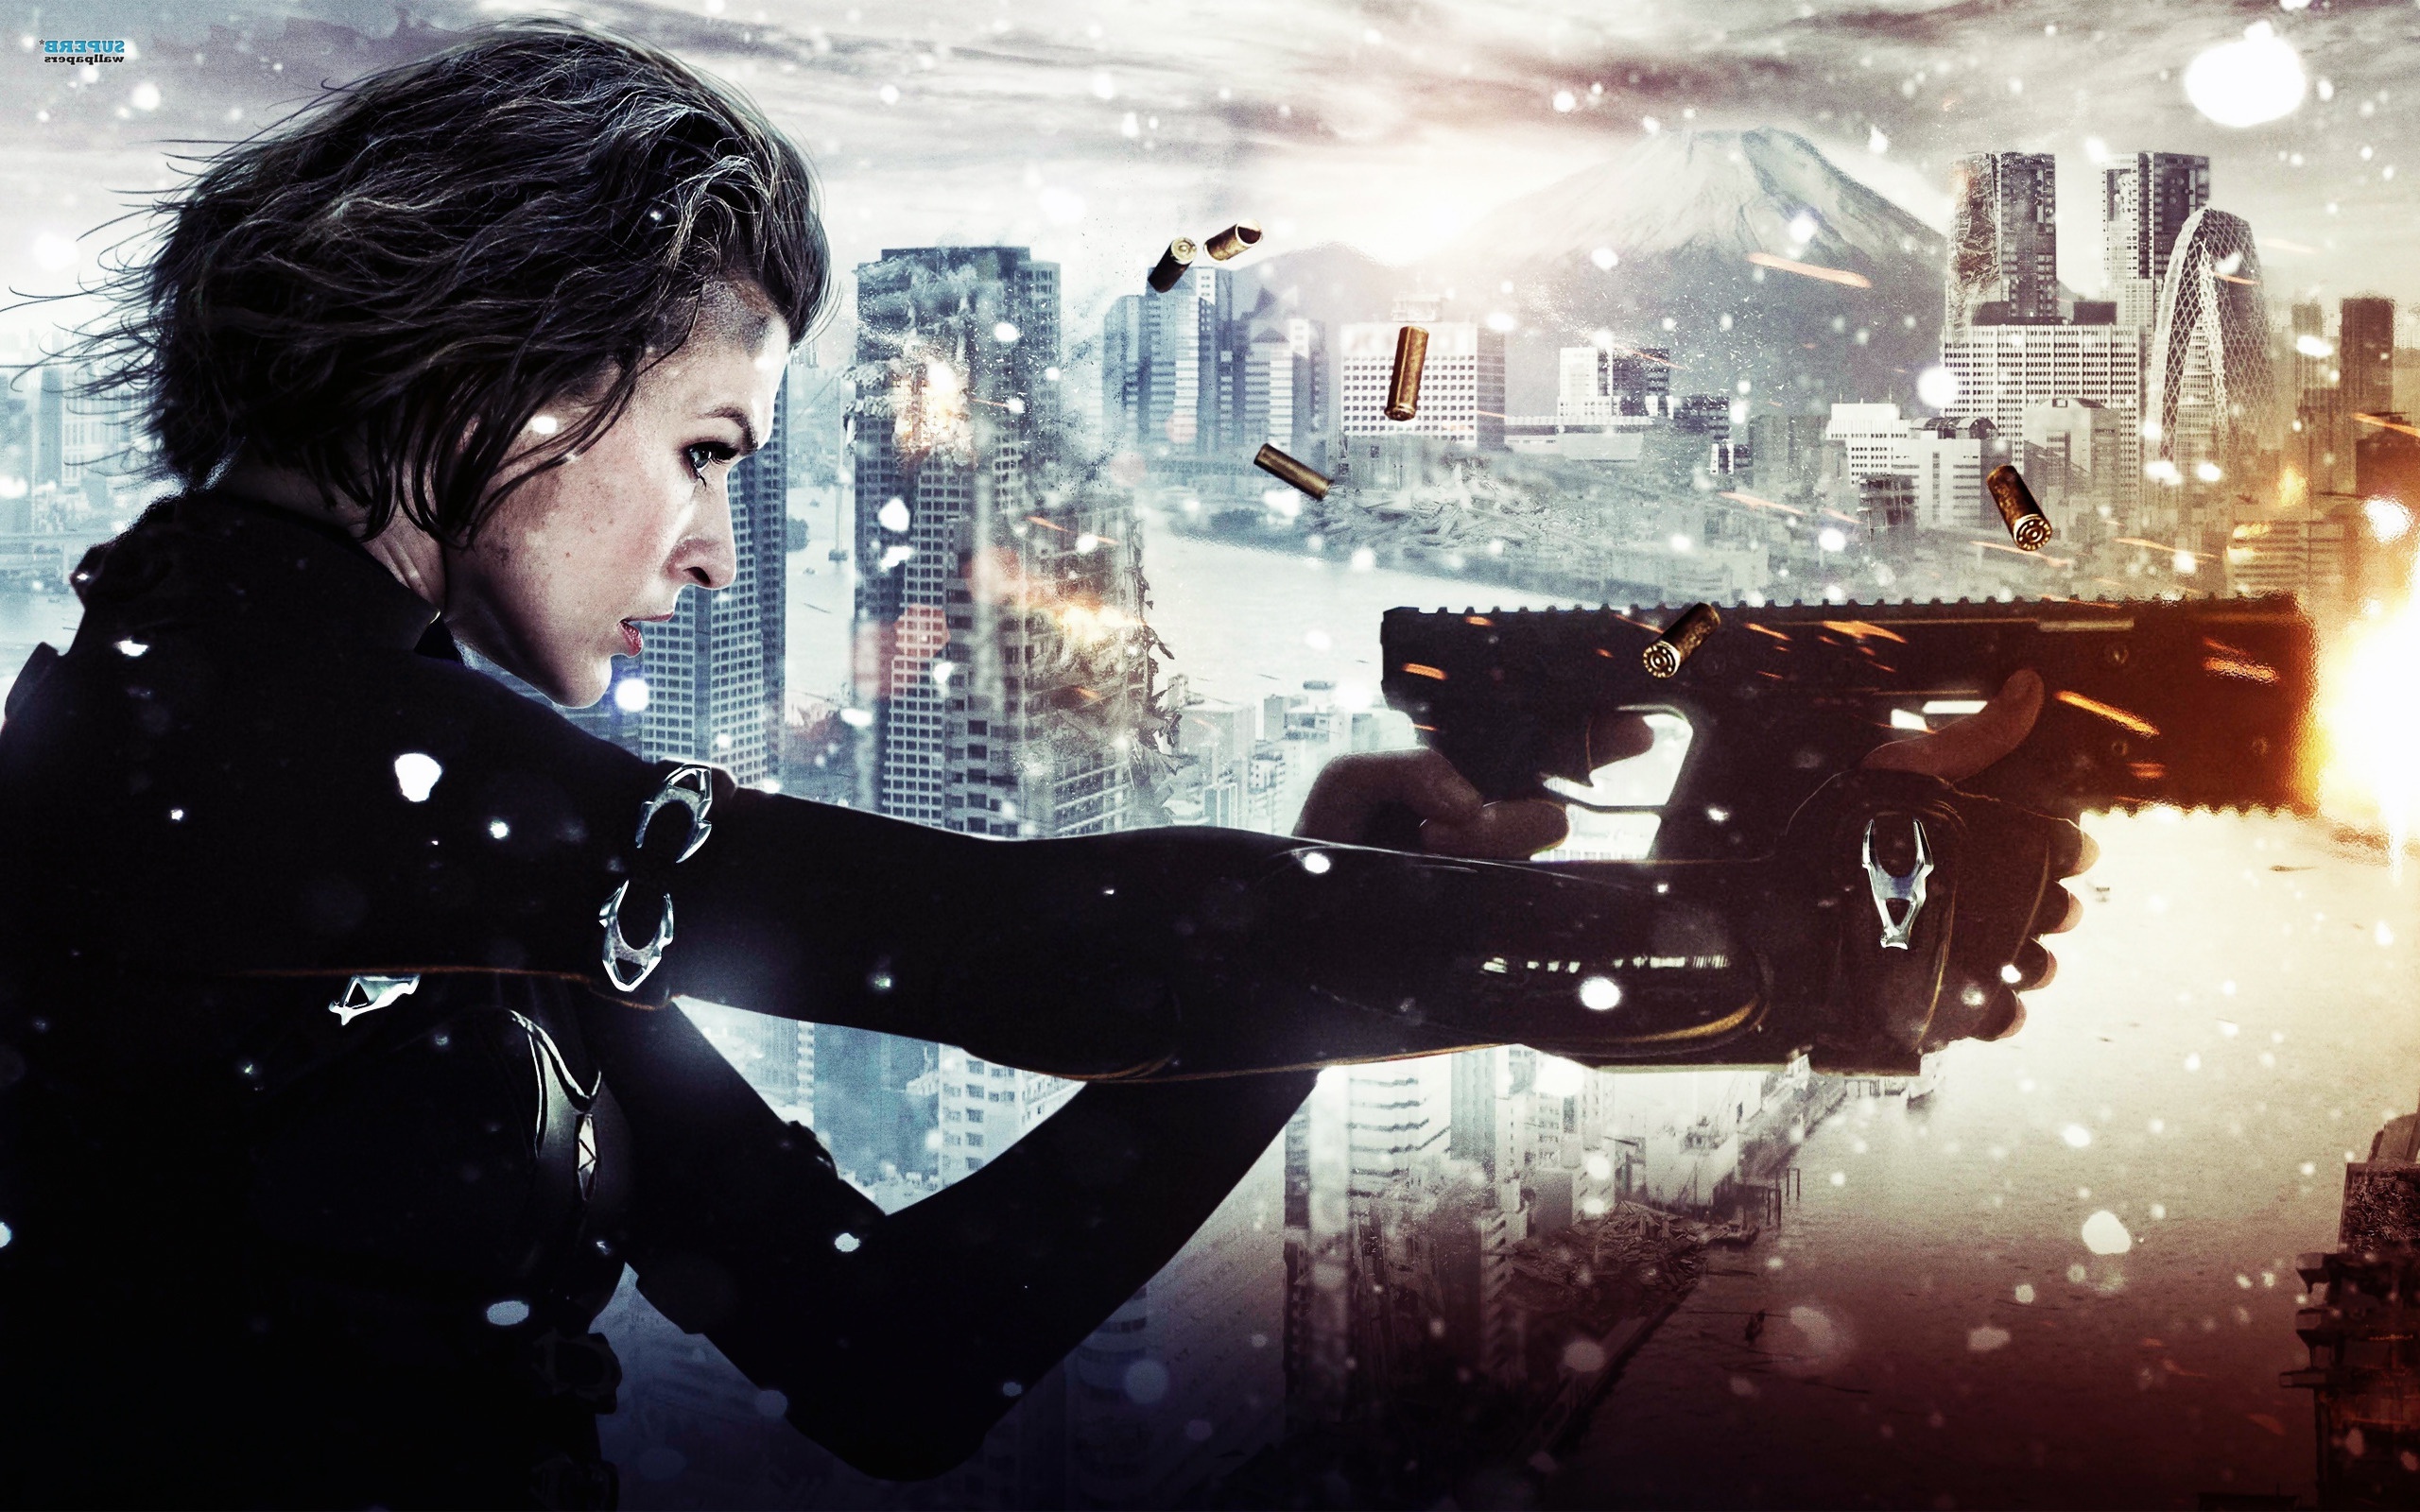 Wallpapers Milla Jovovich movies Resident Evil on the desktop